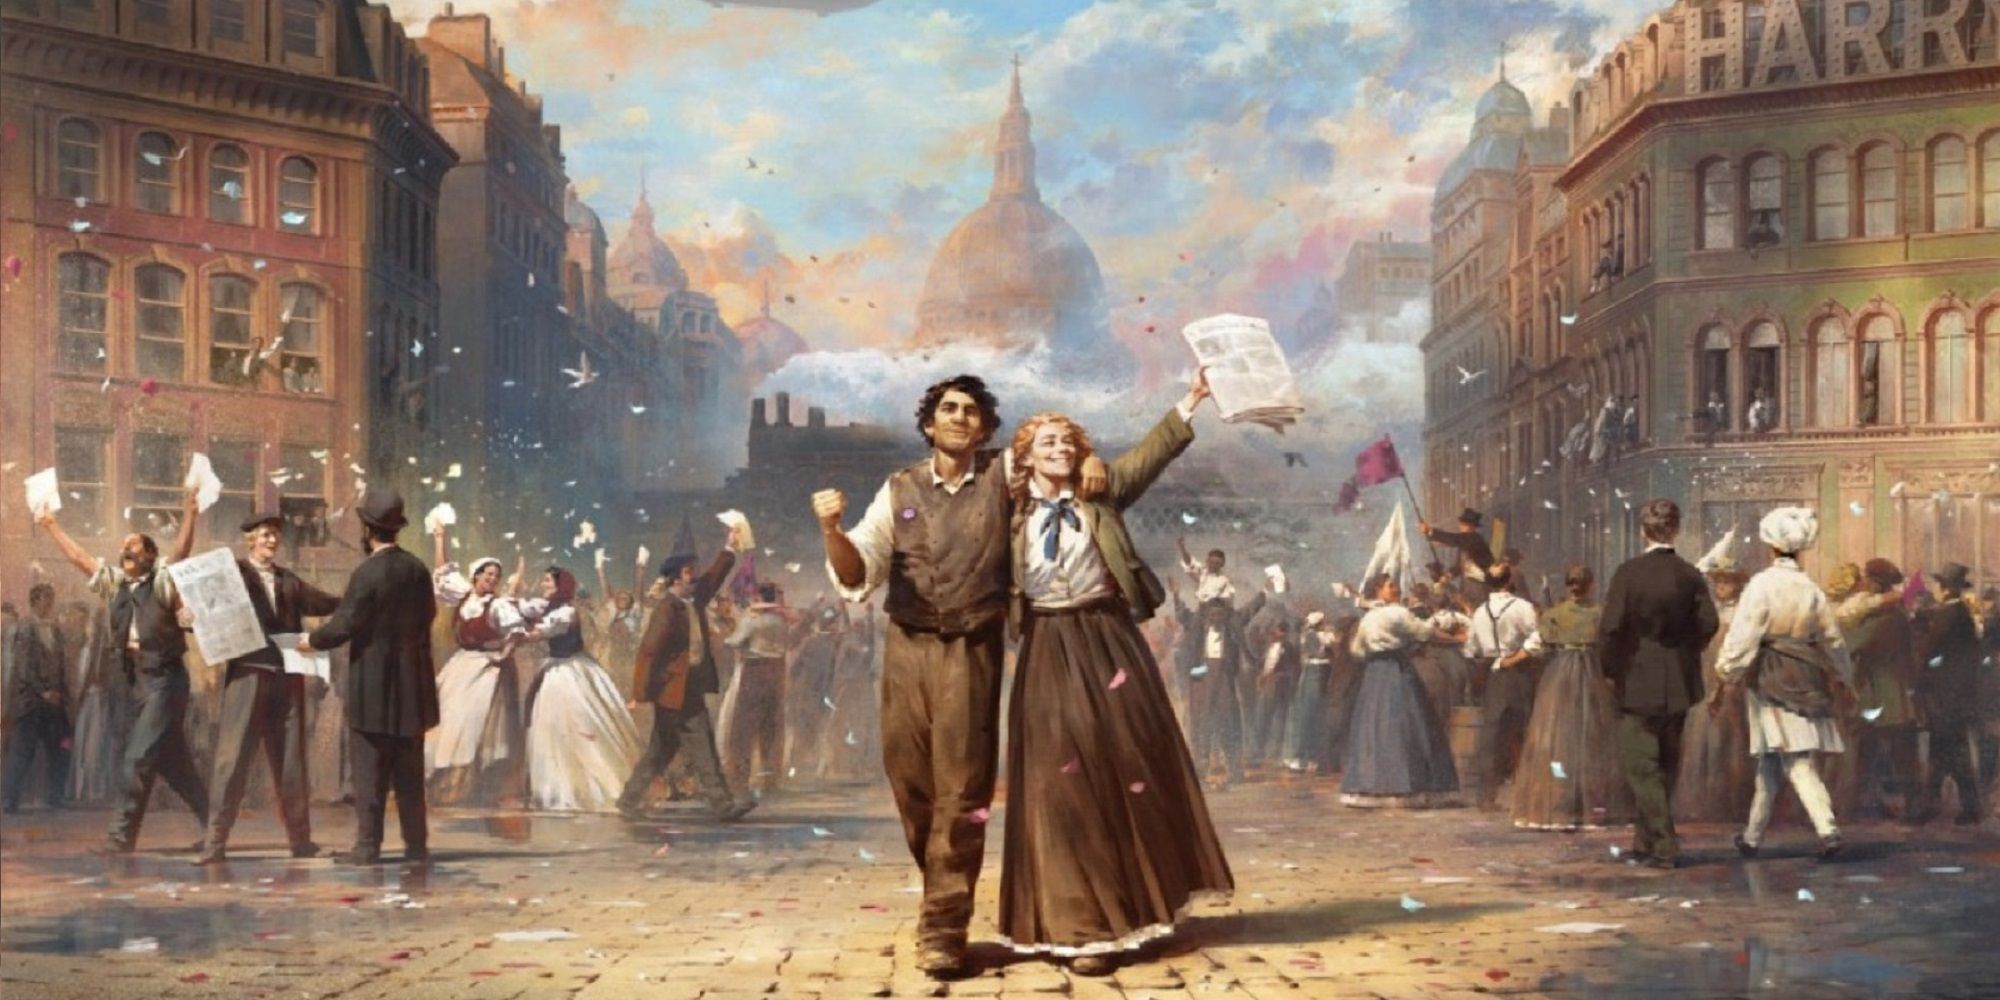 victoria 3 official poster showing a couple celebrating a political victory